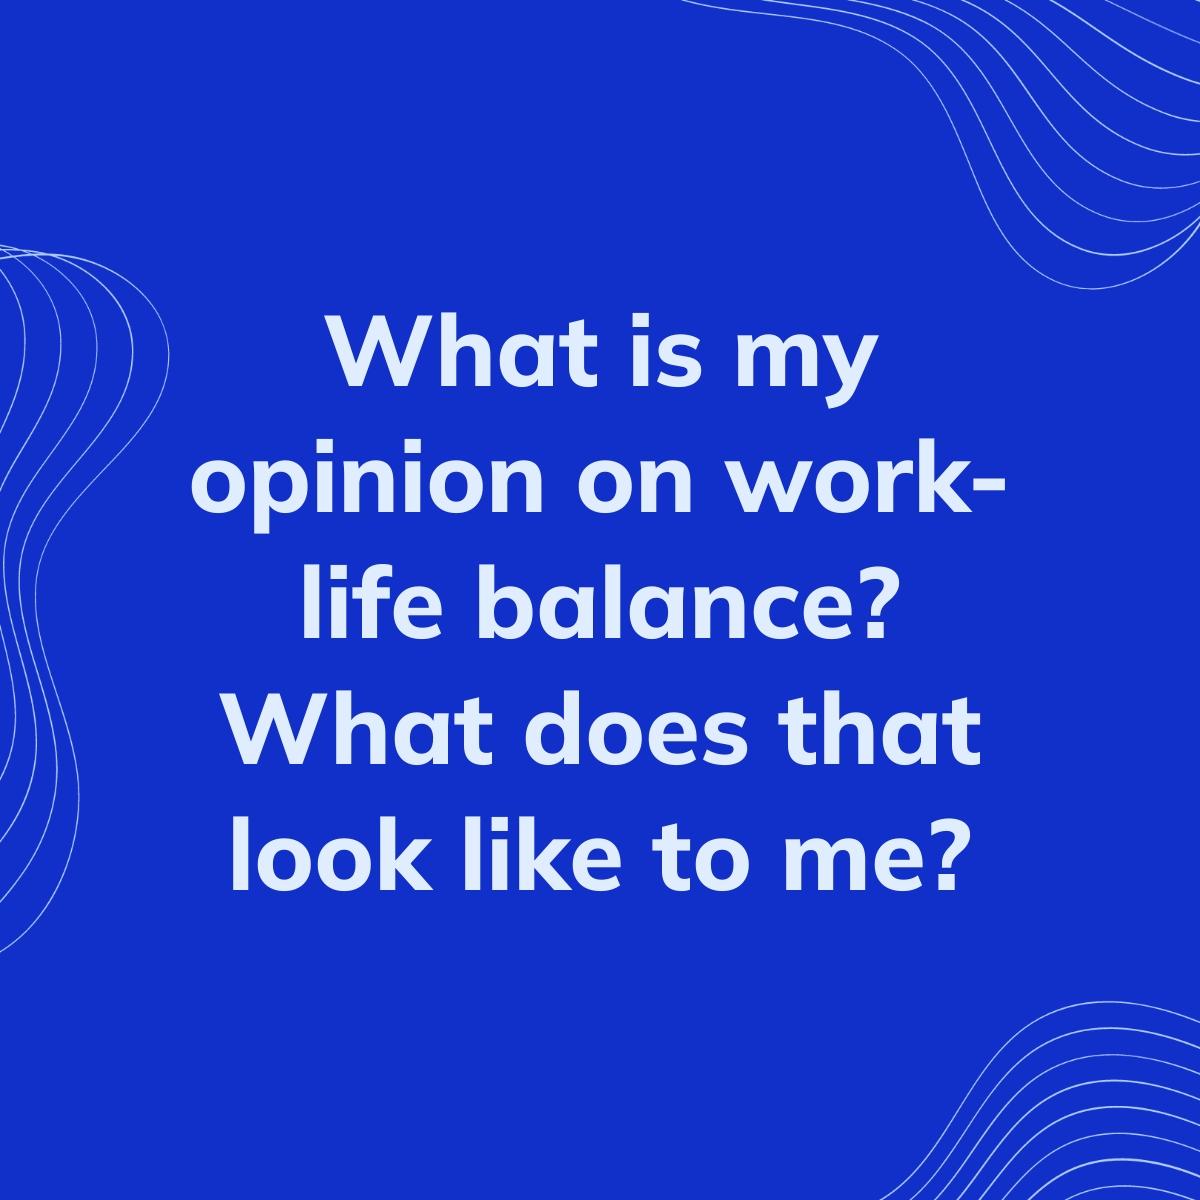 Journal Prompt: What is my opinion on work-life balance? What does that look like to me?